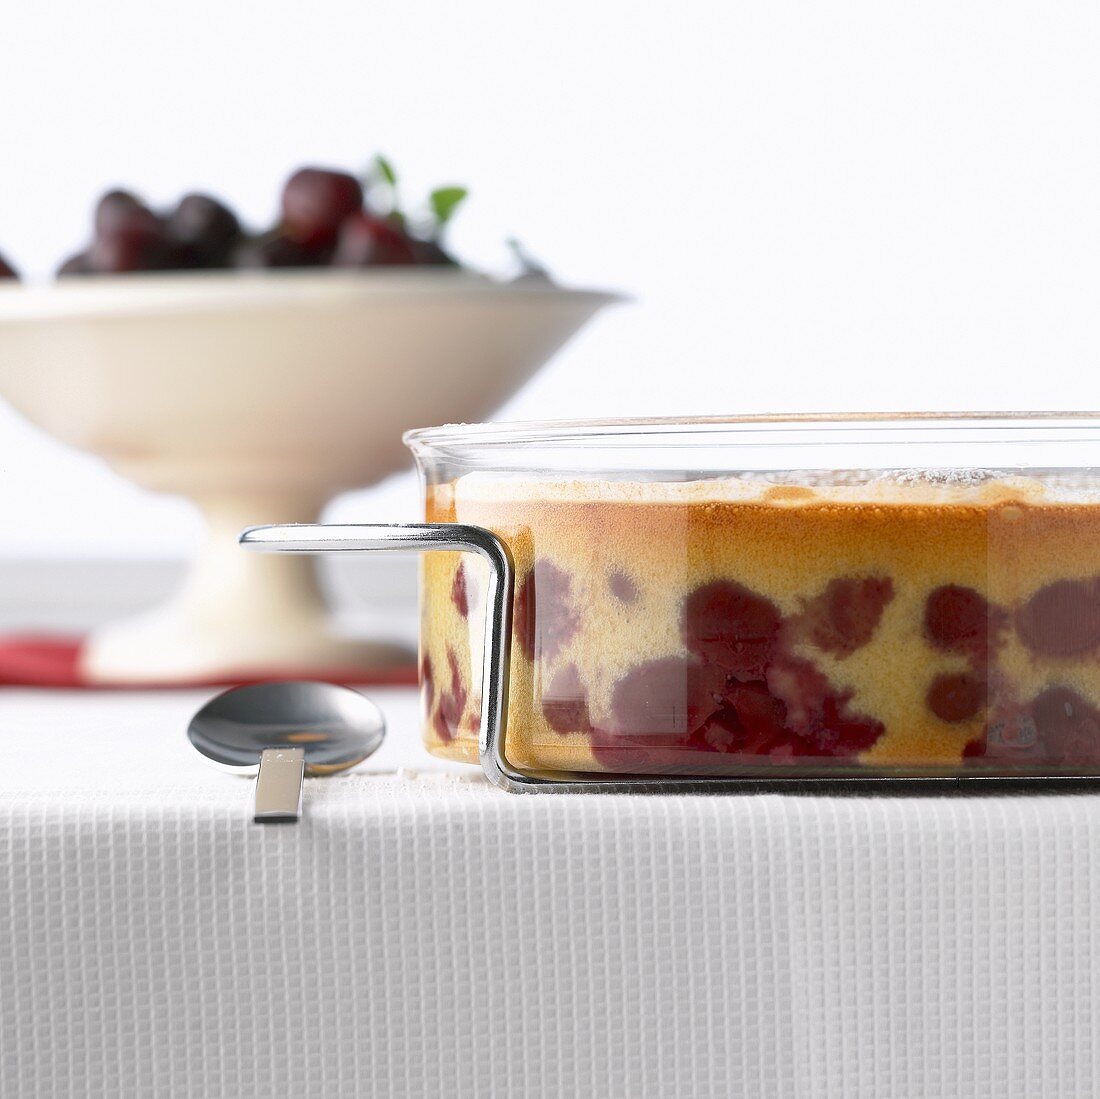 French cherry pudding in a glass dish